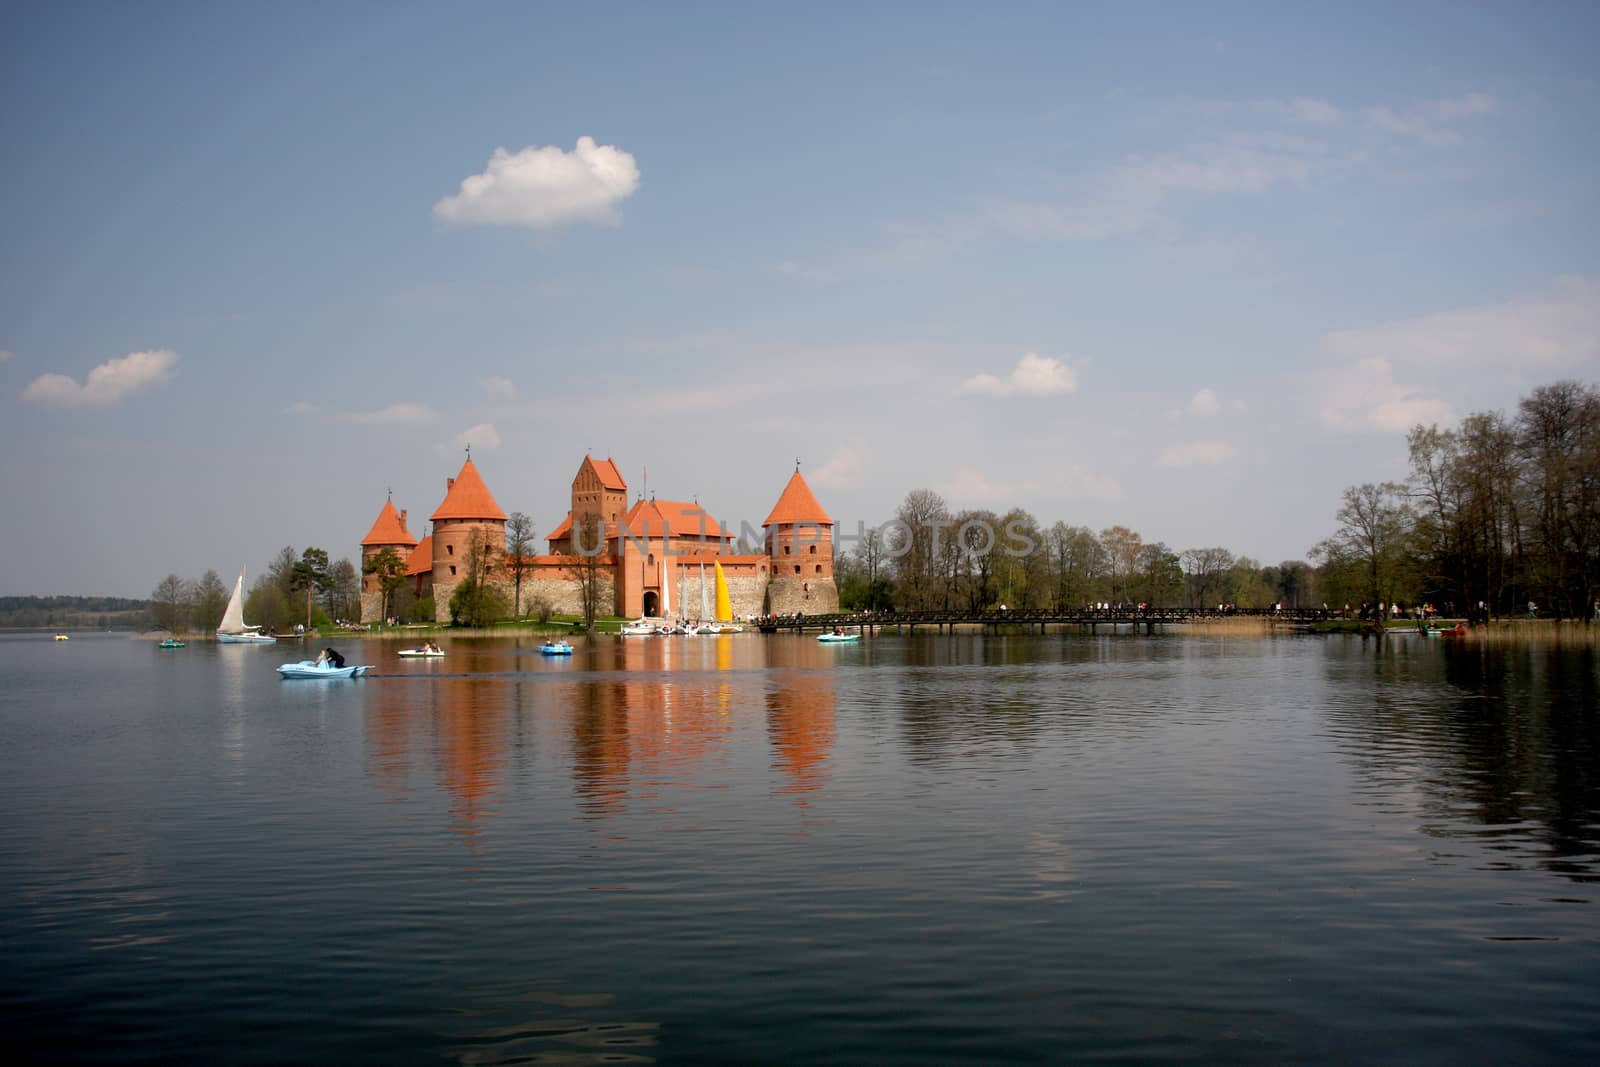 Trakai, Lithuania - April 27, 2008: Trakai Island Castle located on lake Galvė. The build has started in 14th century and was finished about 1409. It is very popular tourist destination in Lithuania.